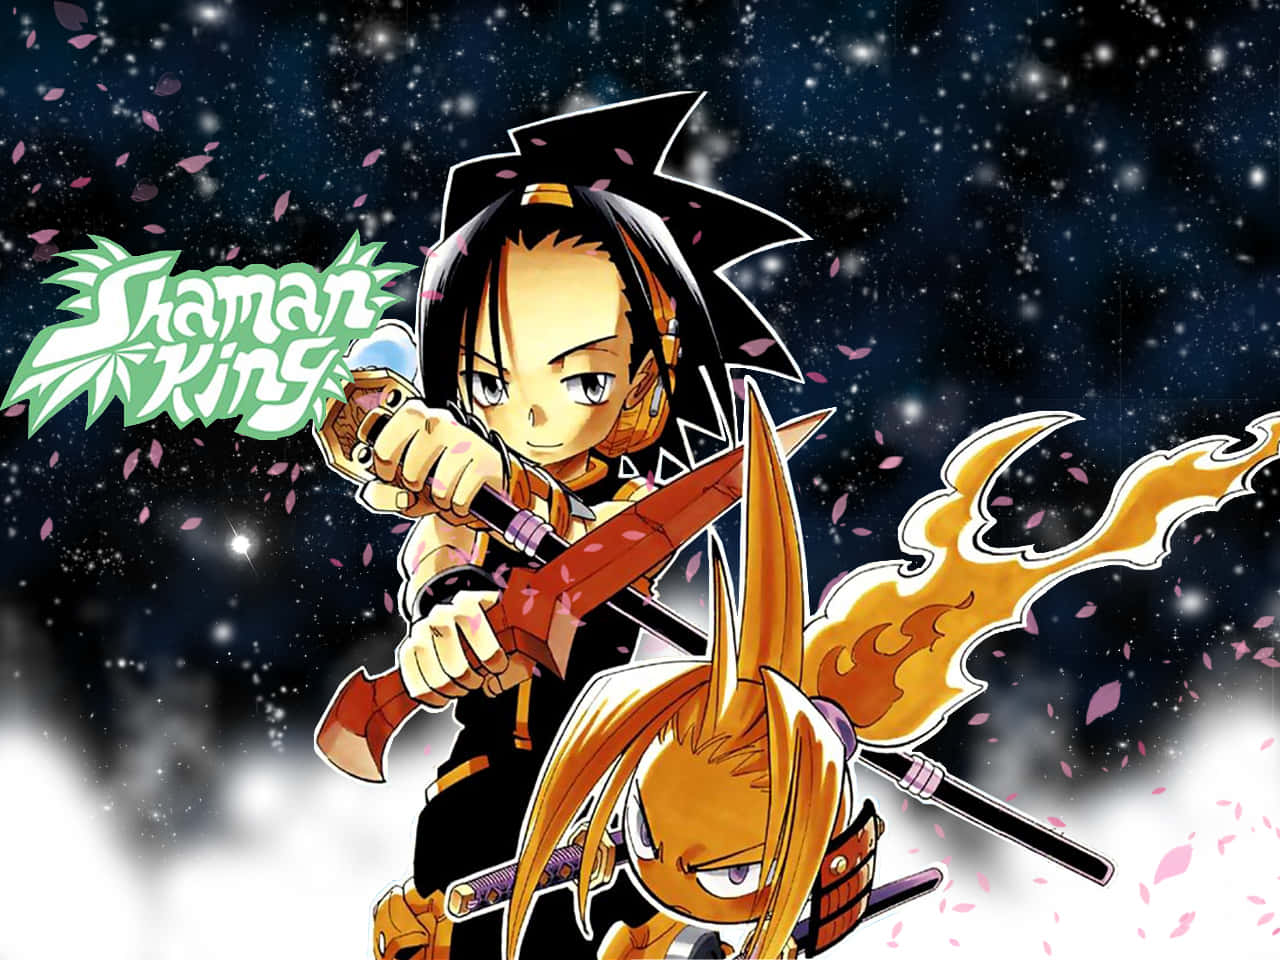 Unlock the hidden power of Shaman King and discover the true strength of your spirit.